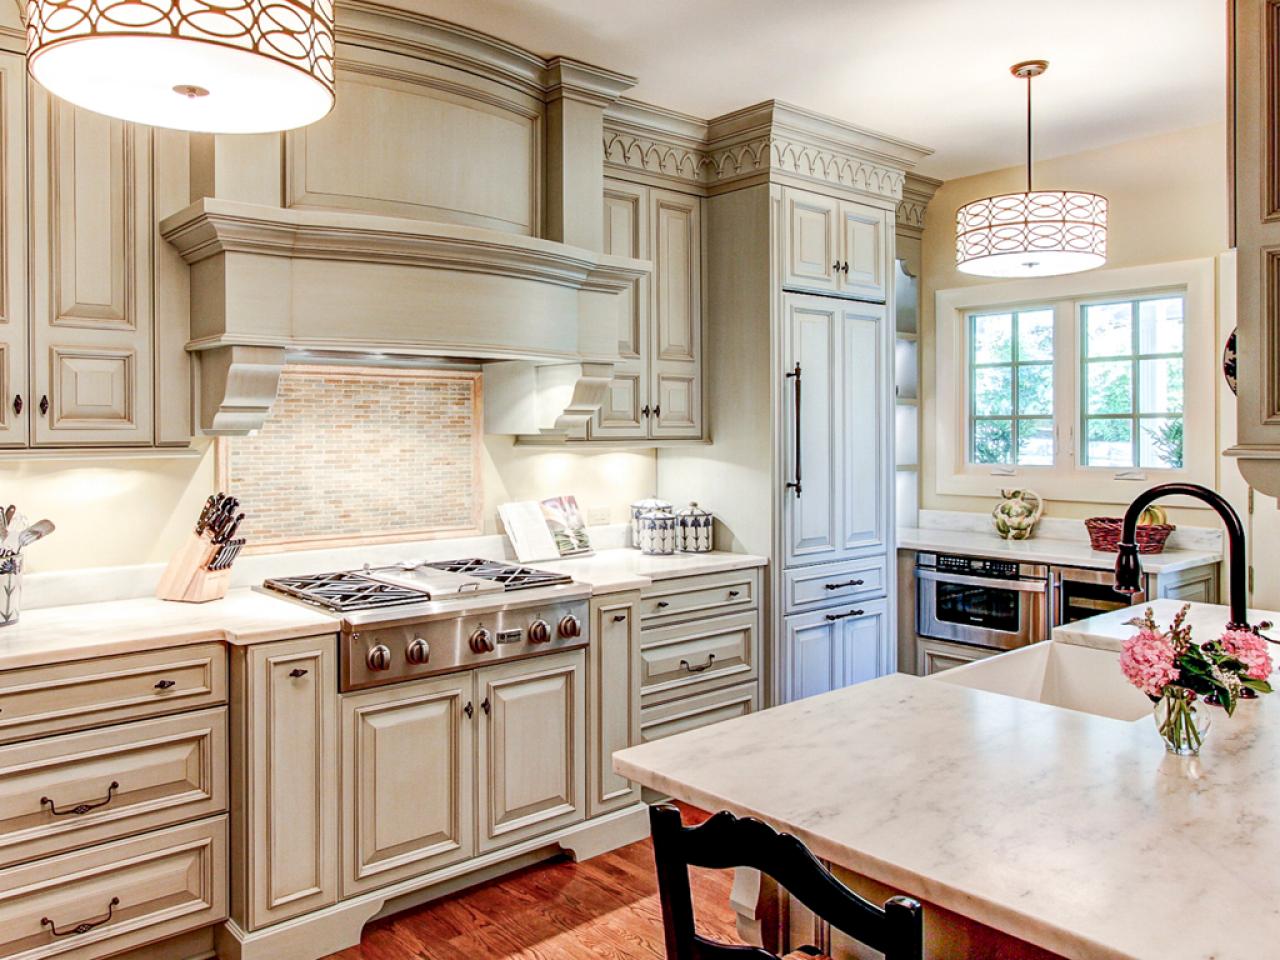 French Country Kitchen Cabinets: Pictures & Ideas From ...